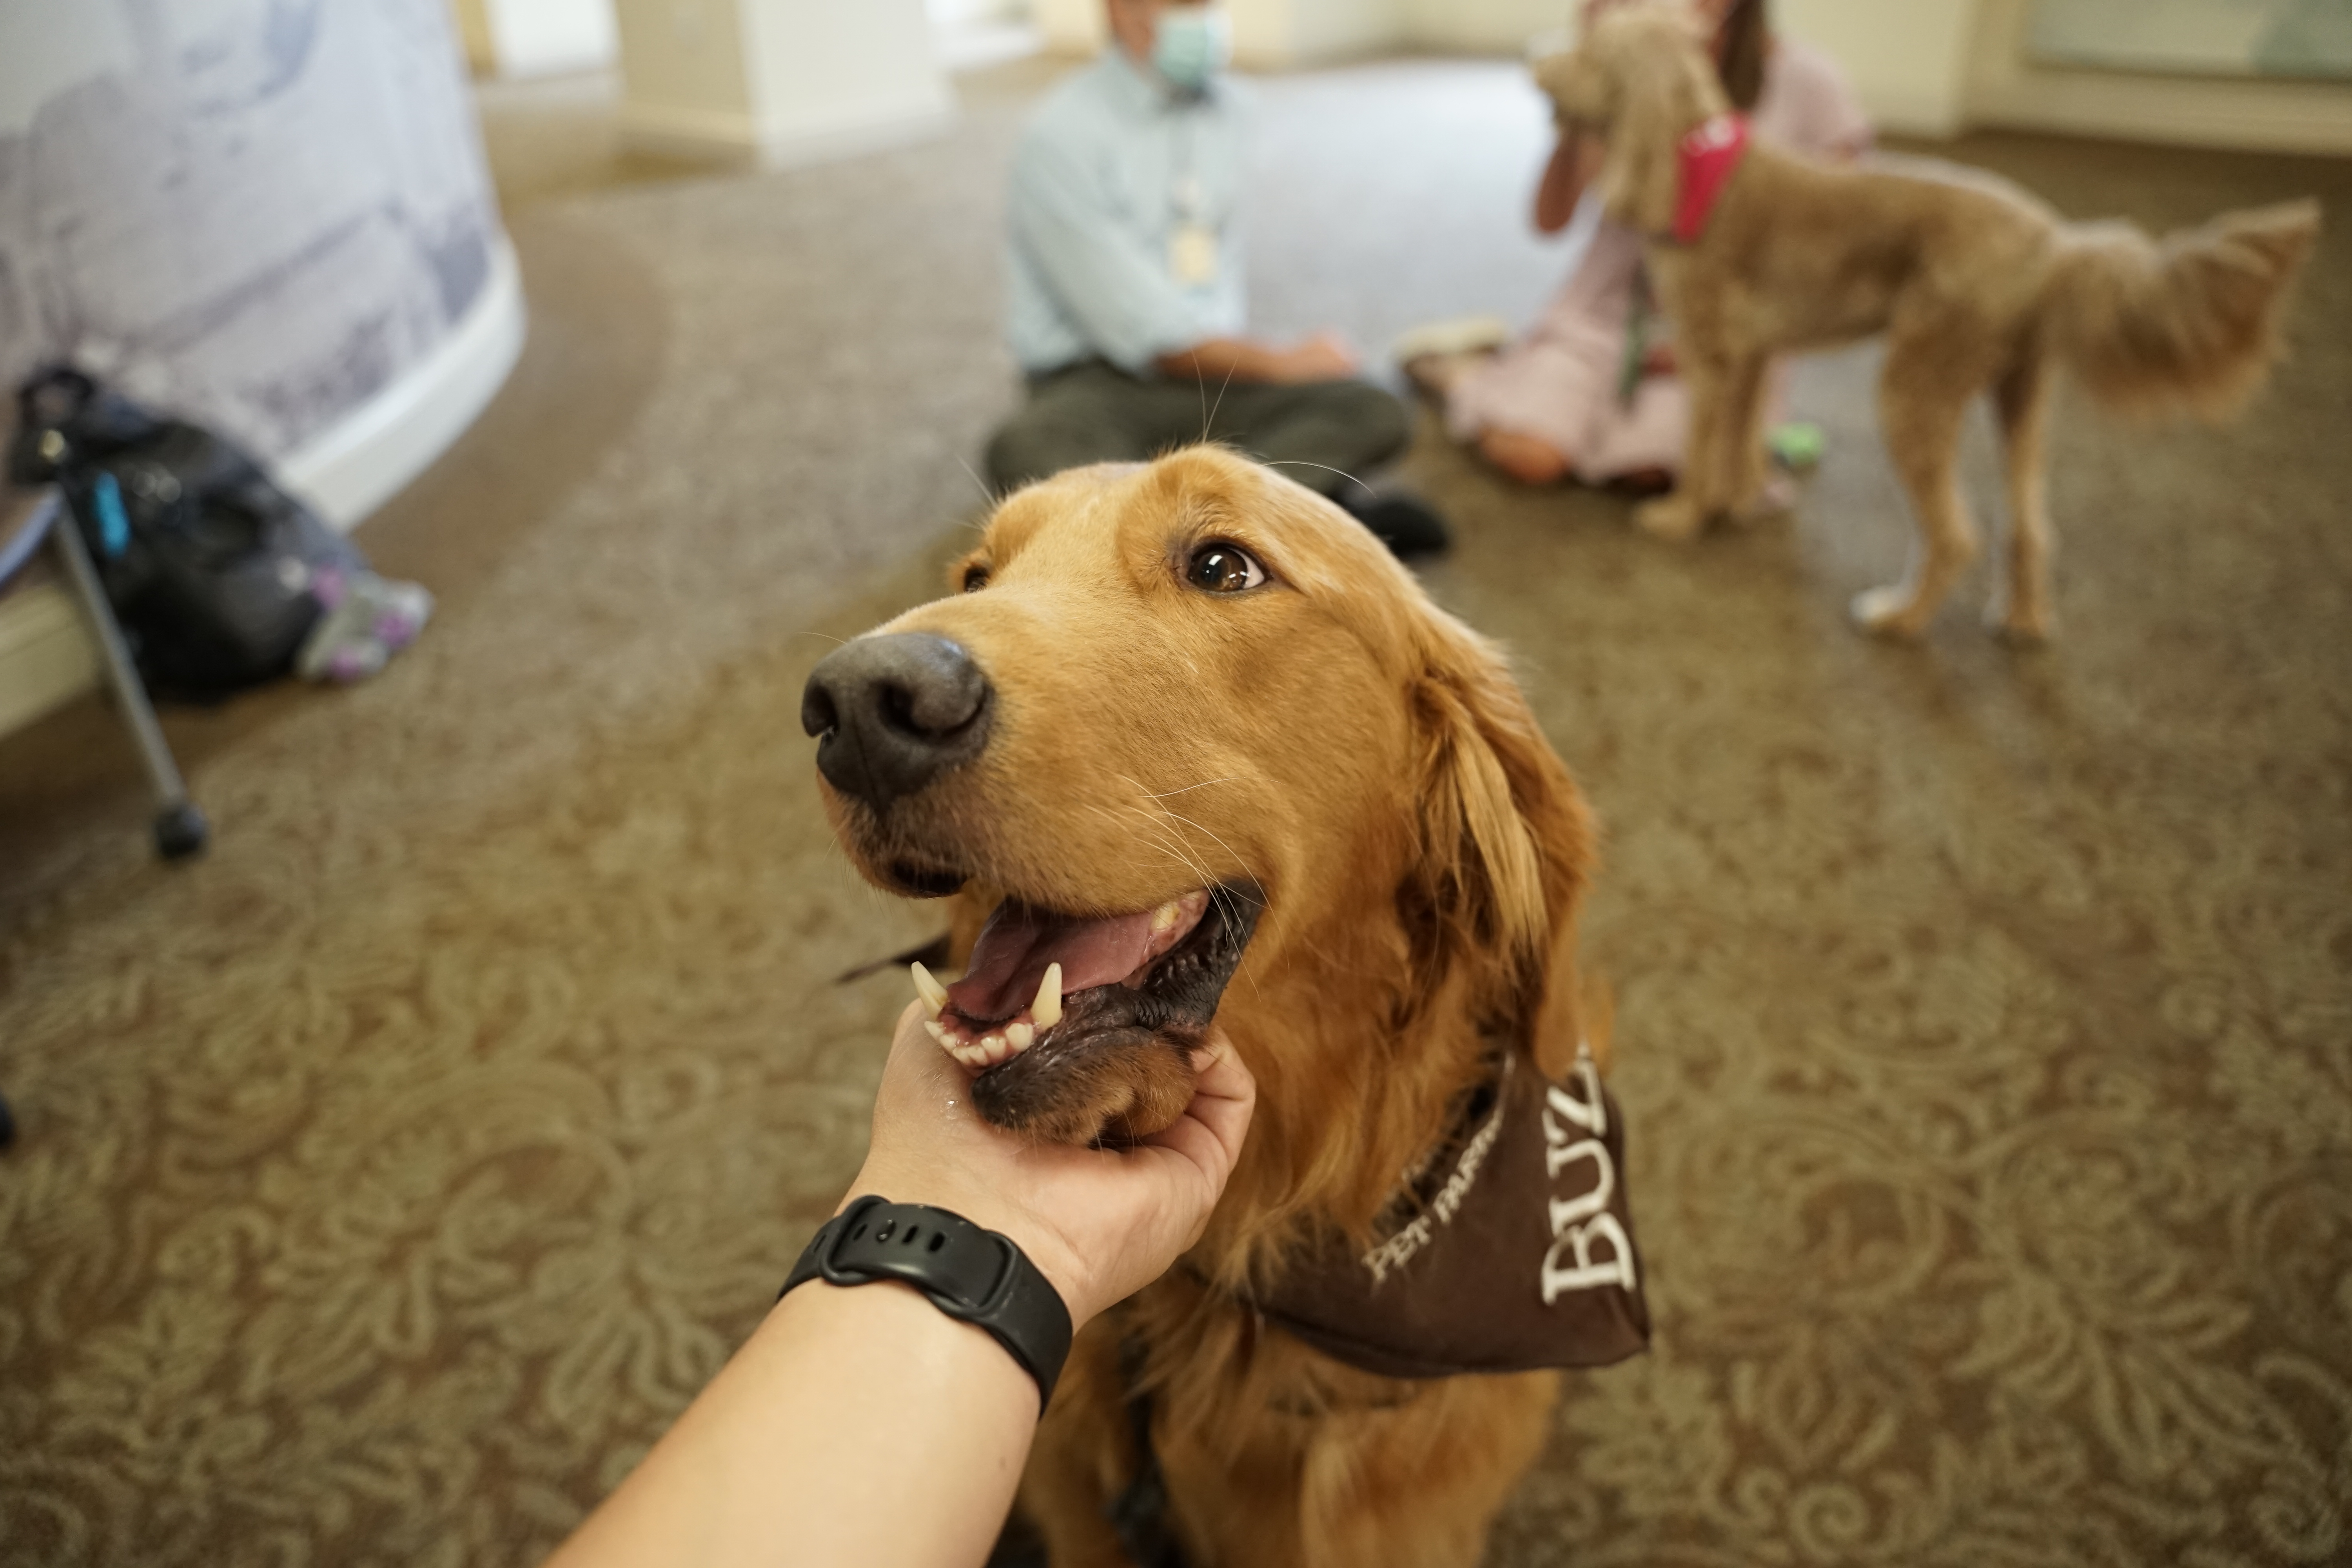 A Phoebe Putney Memorial Hospital staff member pets a therapy dog, named Buzz, during Mental Health Awareness Week last week. Phoebe Putney Health System, based in Albany, invited staff to hang out with therapy dogs as part of the week's activities.  (PHOTO courtesy of Phoebe Putney Health System)